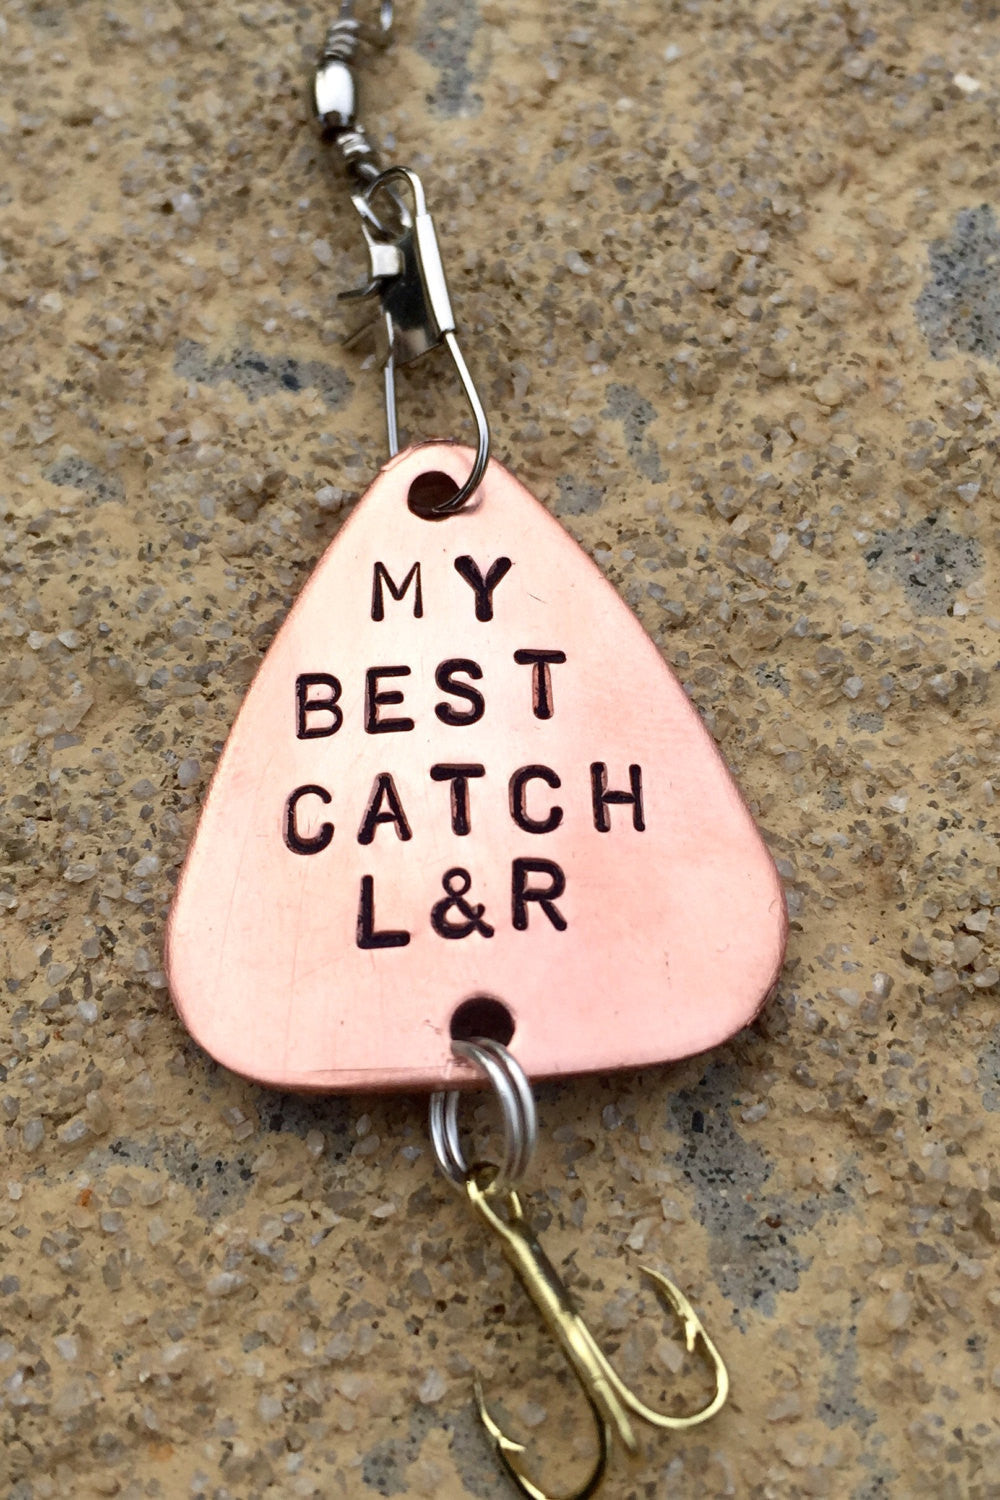 Fishing Lure,Boyfriend Gift, Personalized Fishing Lure, Hand Stamped Fishing Lure,Custom Lures, Father Gift - Natashaaloha, jewelry, bracelets, necklace, keychains, fishing lures, gifts for men, charms, personalized, 